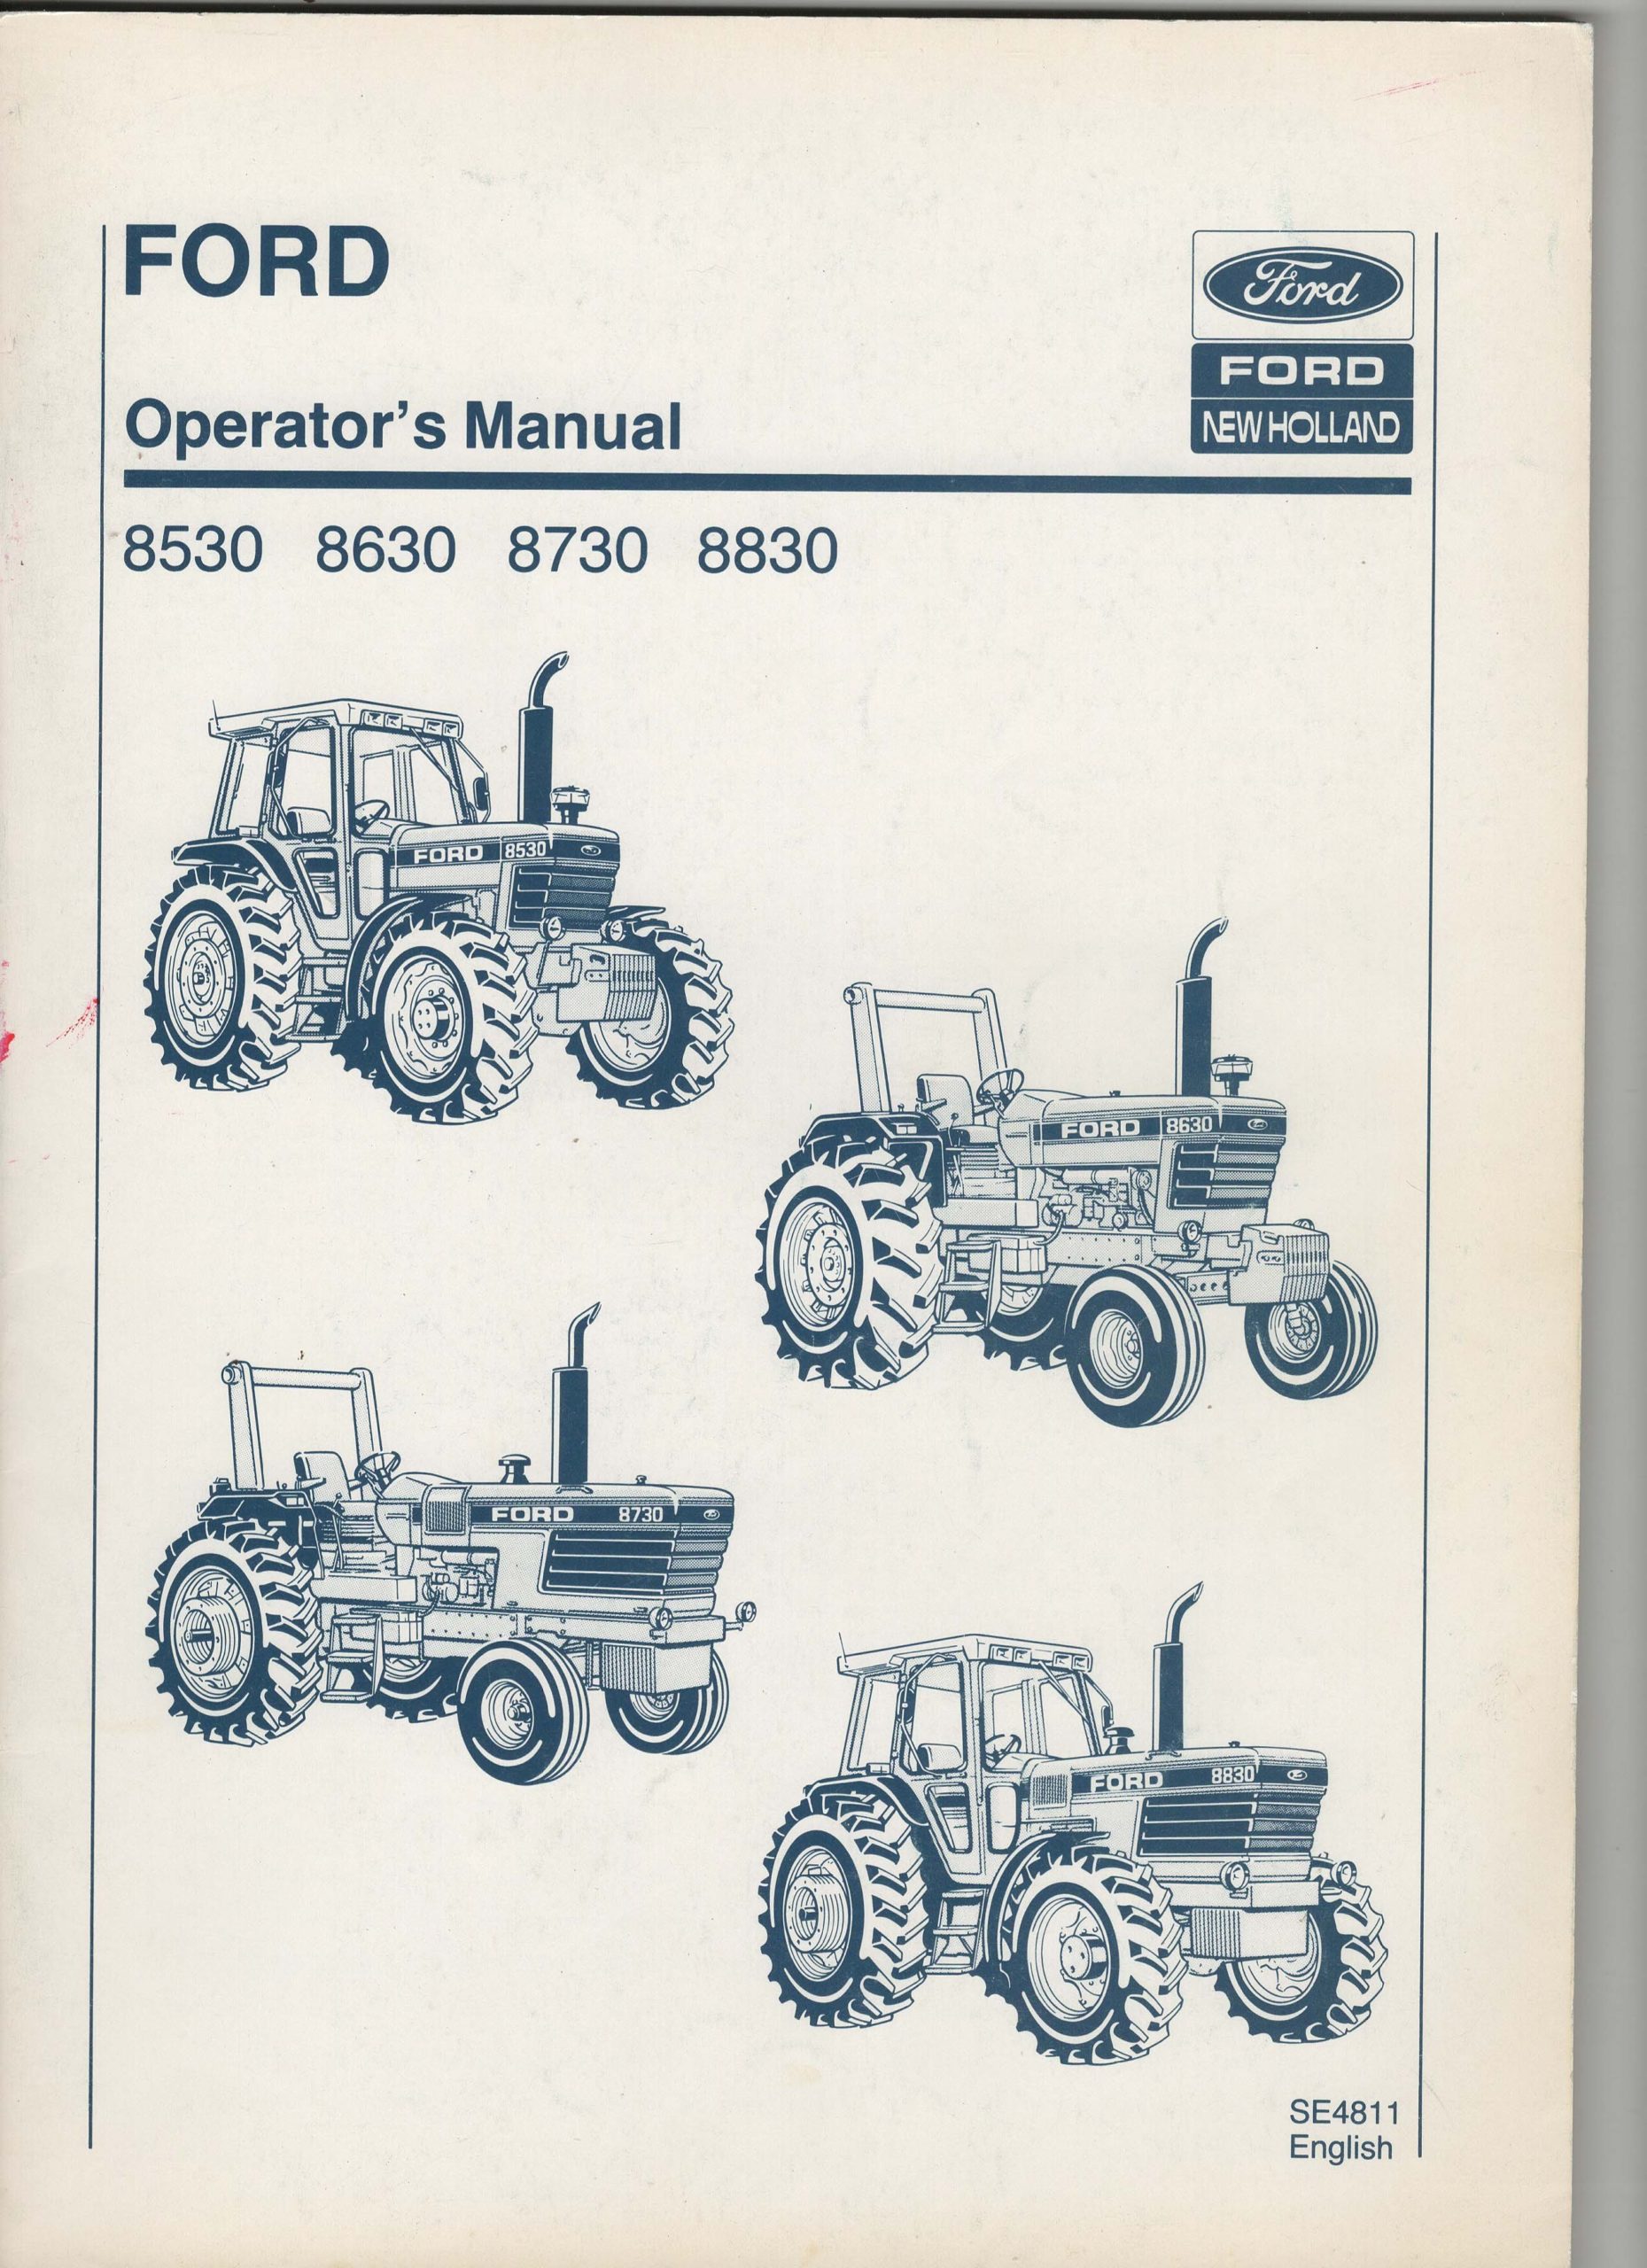 new holland tractor manuals online